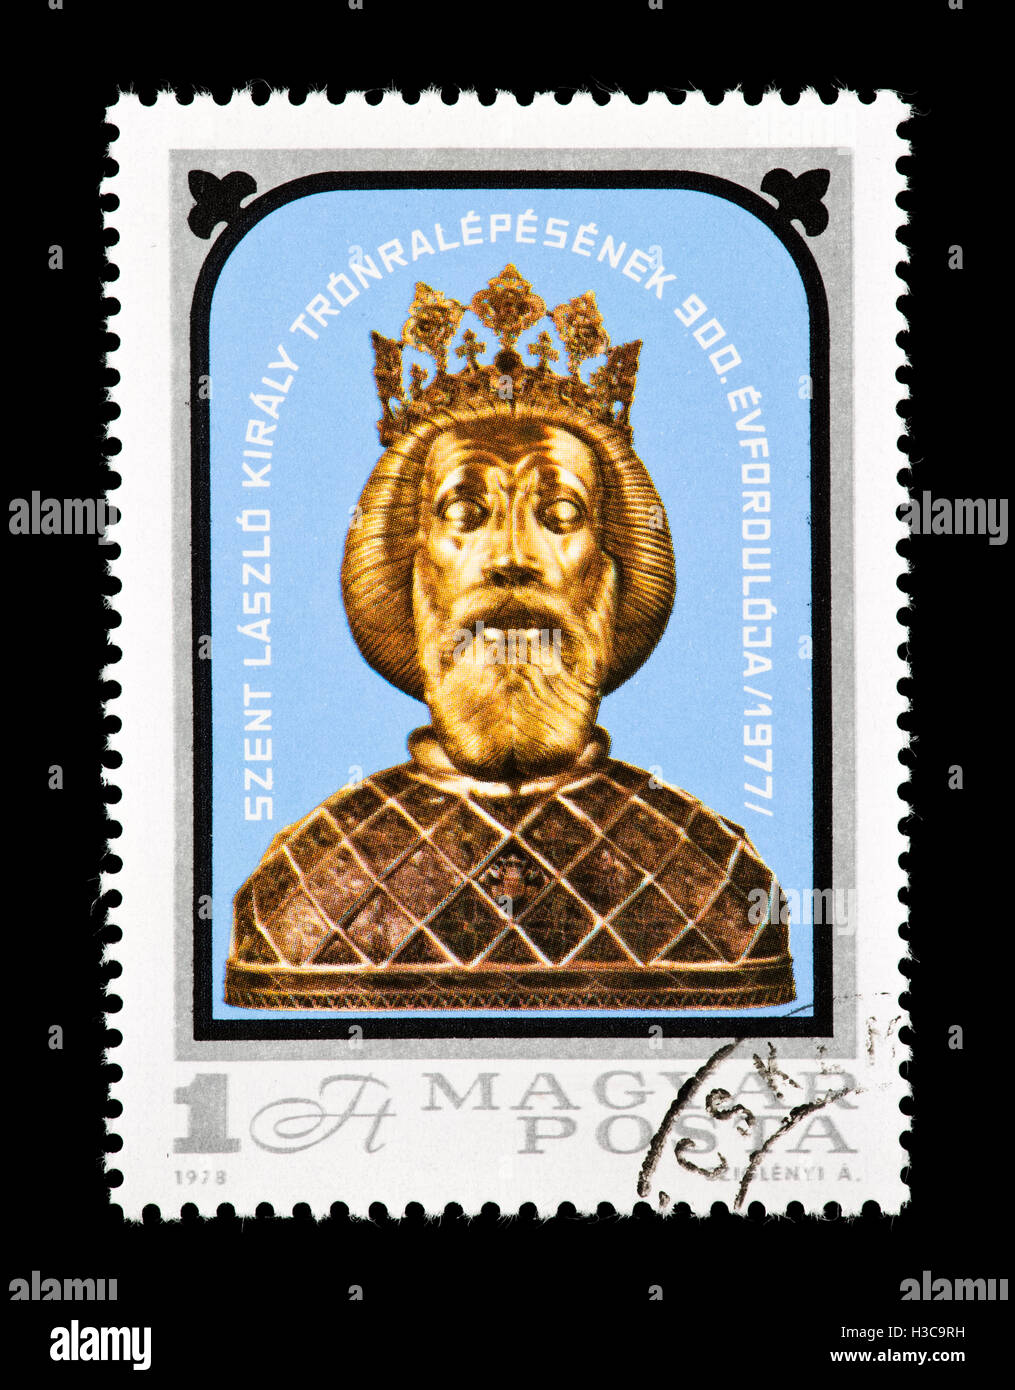 Postage stamp from Hungary showing St. Ladislas I Reliquary, Gyor Cathedral, 900th anniversary of accession to throne of Hungary Stock Photo